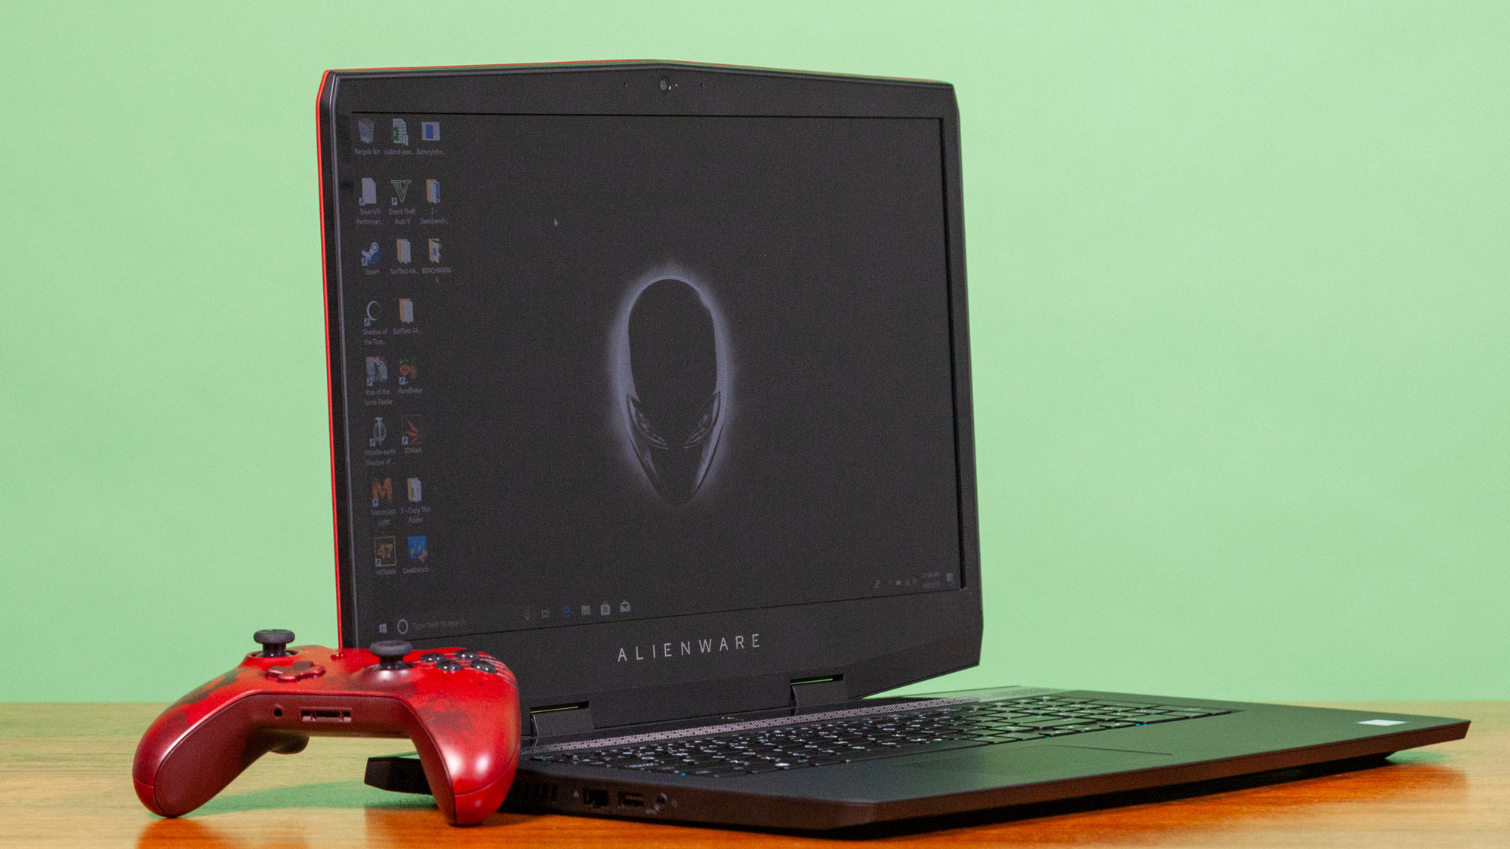 Alienware Alienware M9700 M9750 M17 R1 SD and Express Card Dummy Cards Black 